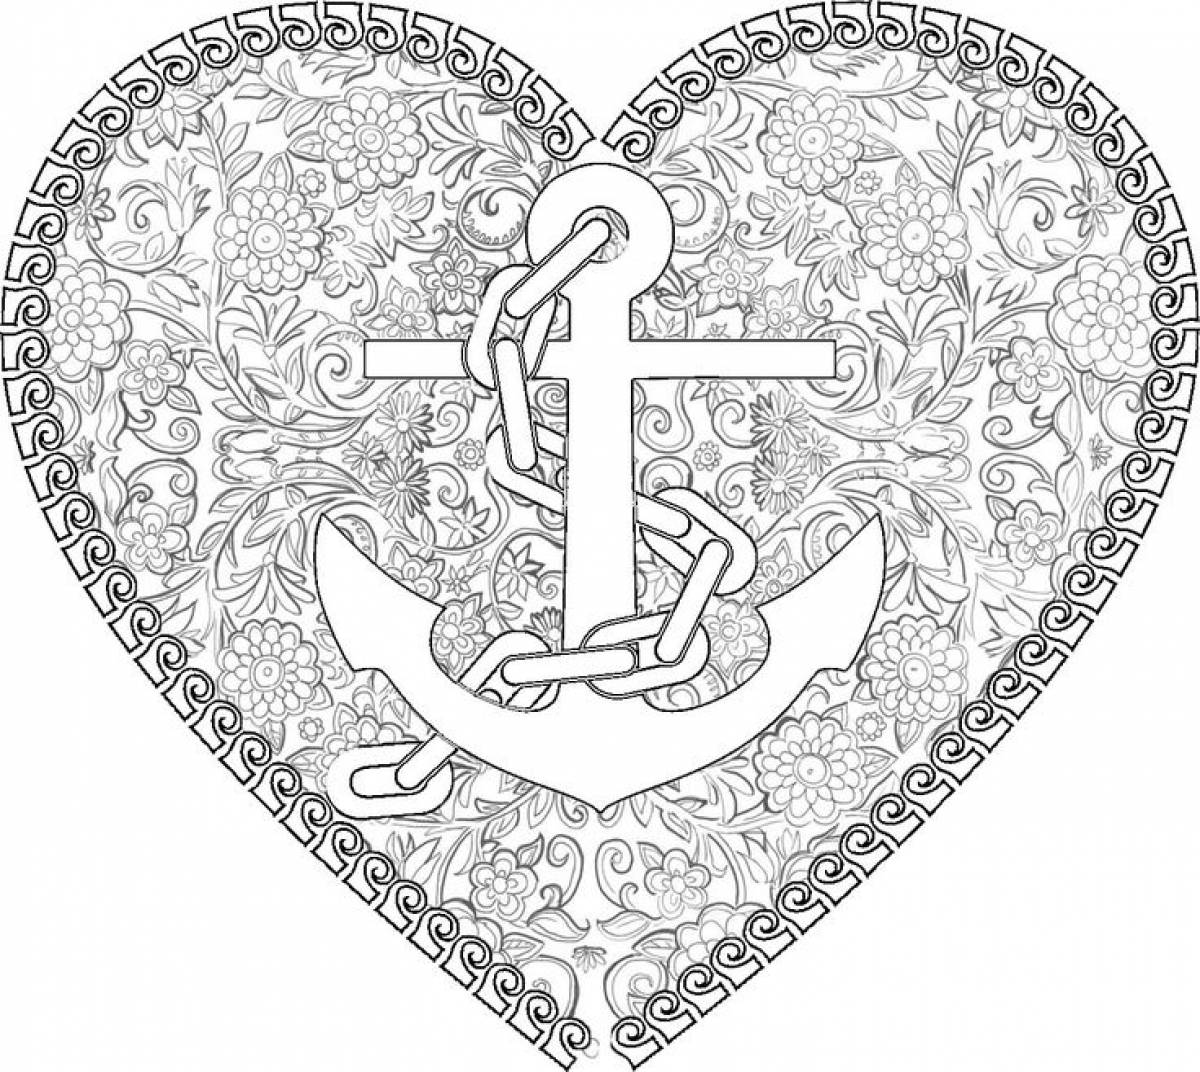 Anchor in the heart